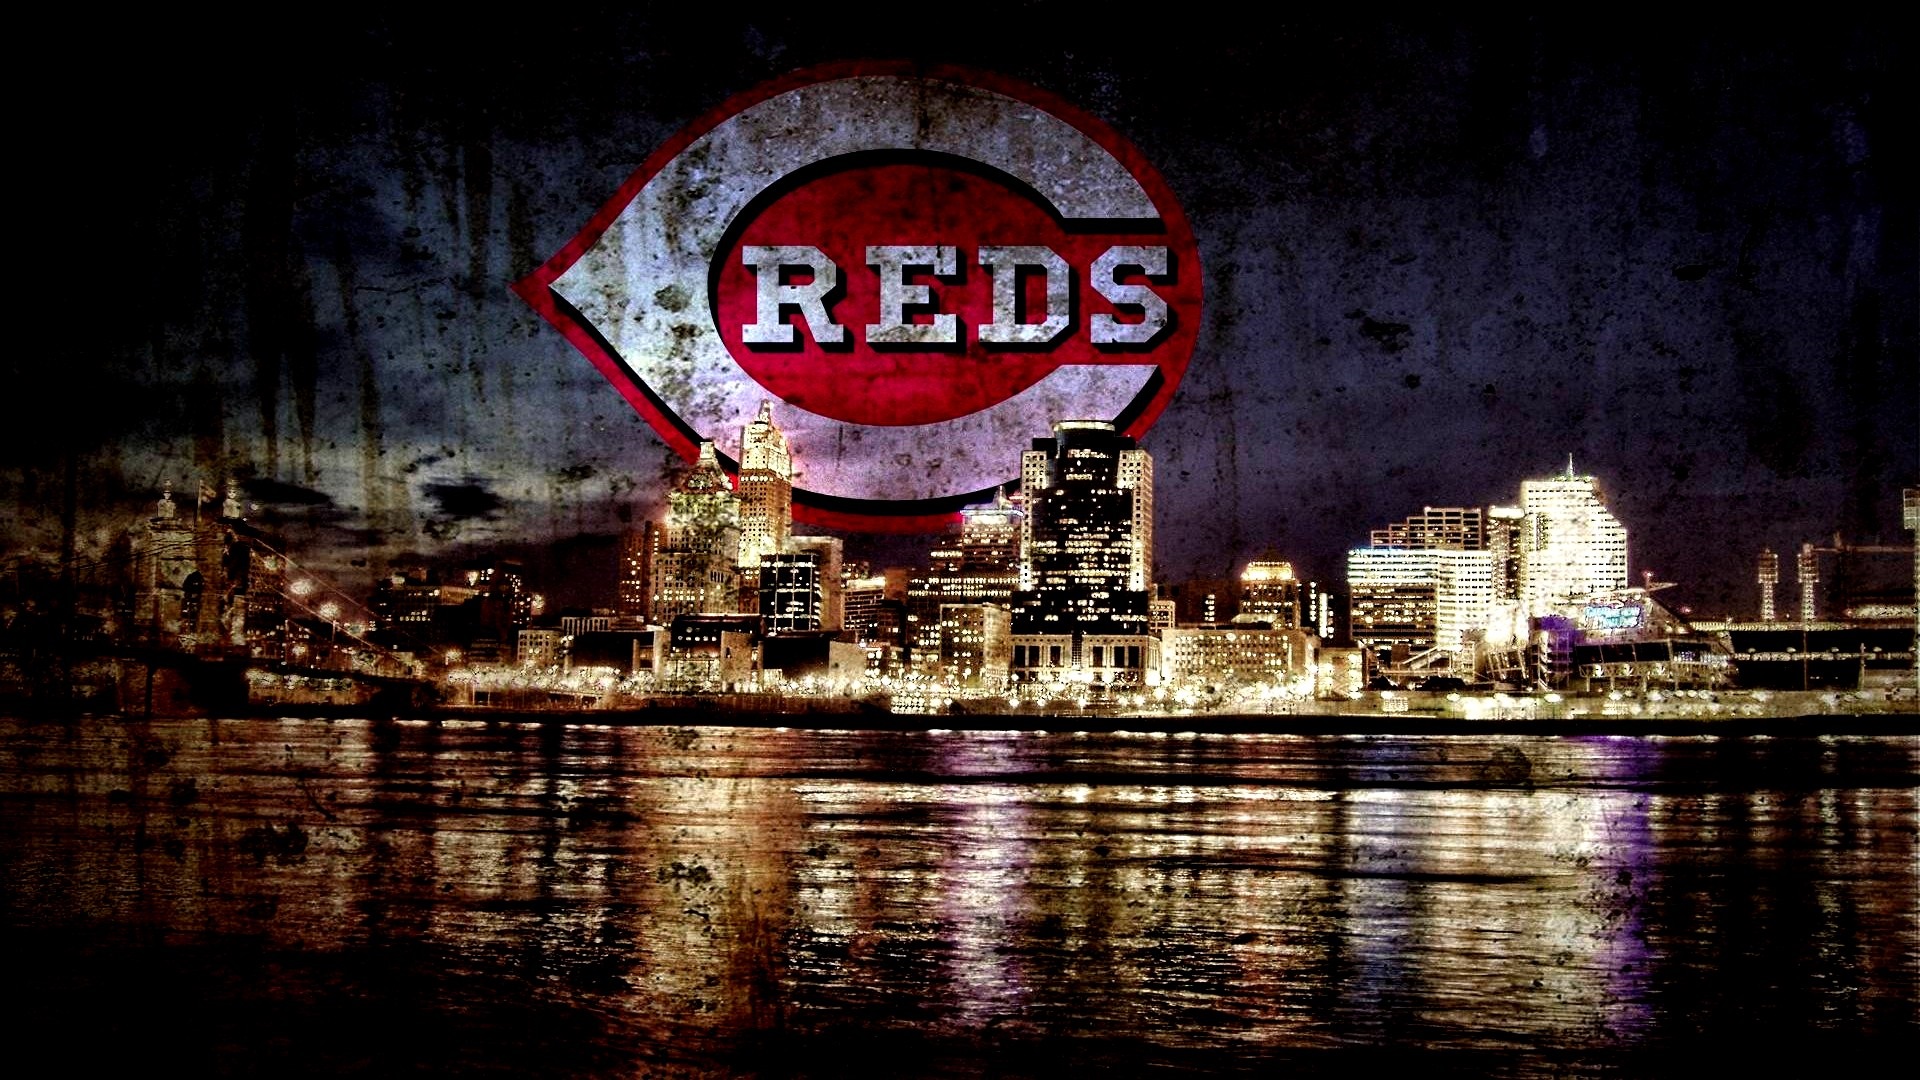 Cincinnati Reds MLB Laptop Wallpaper With high-resolution 1920X1080 pixel. You can use this wallpaper for Mac Desktop Wallpaper, Laptop Screensavers, Android Wallpapers, Tablet or iPhone Home Screen and another mobile phone device